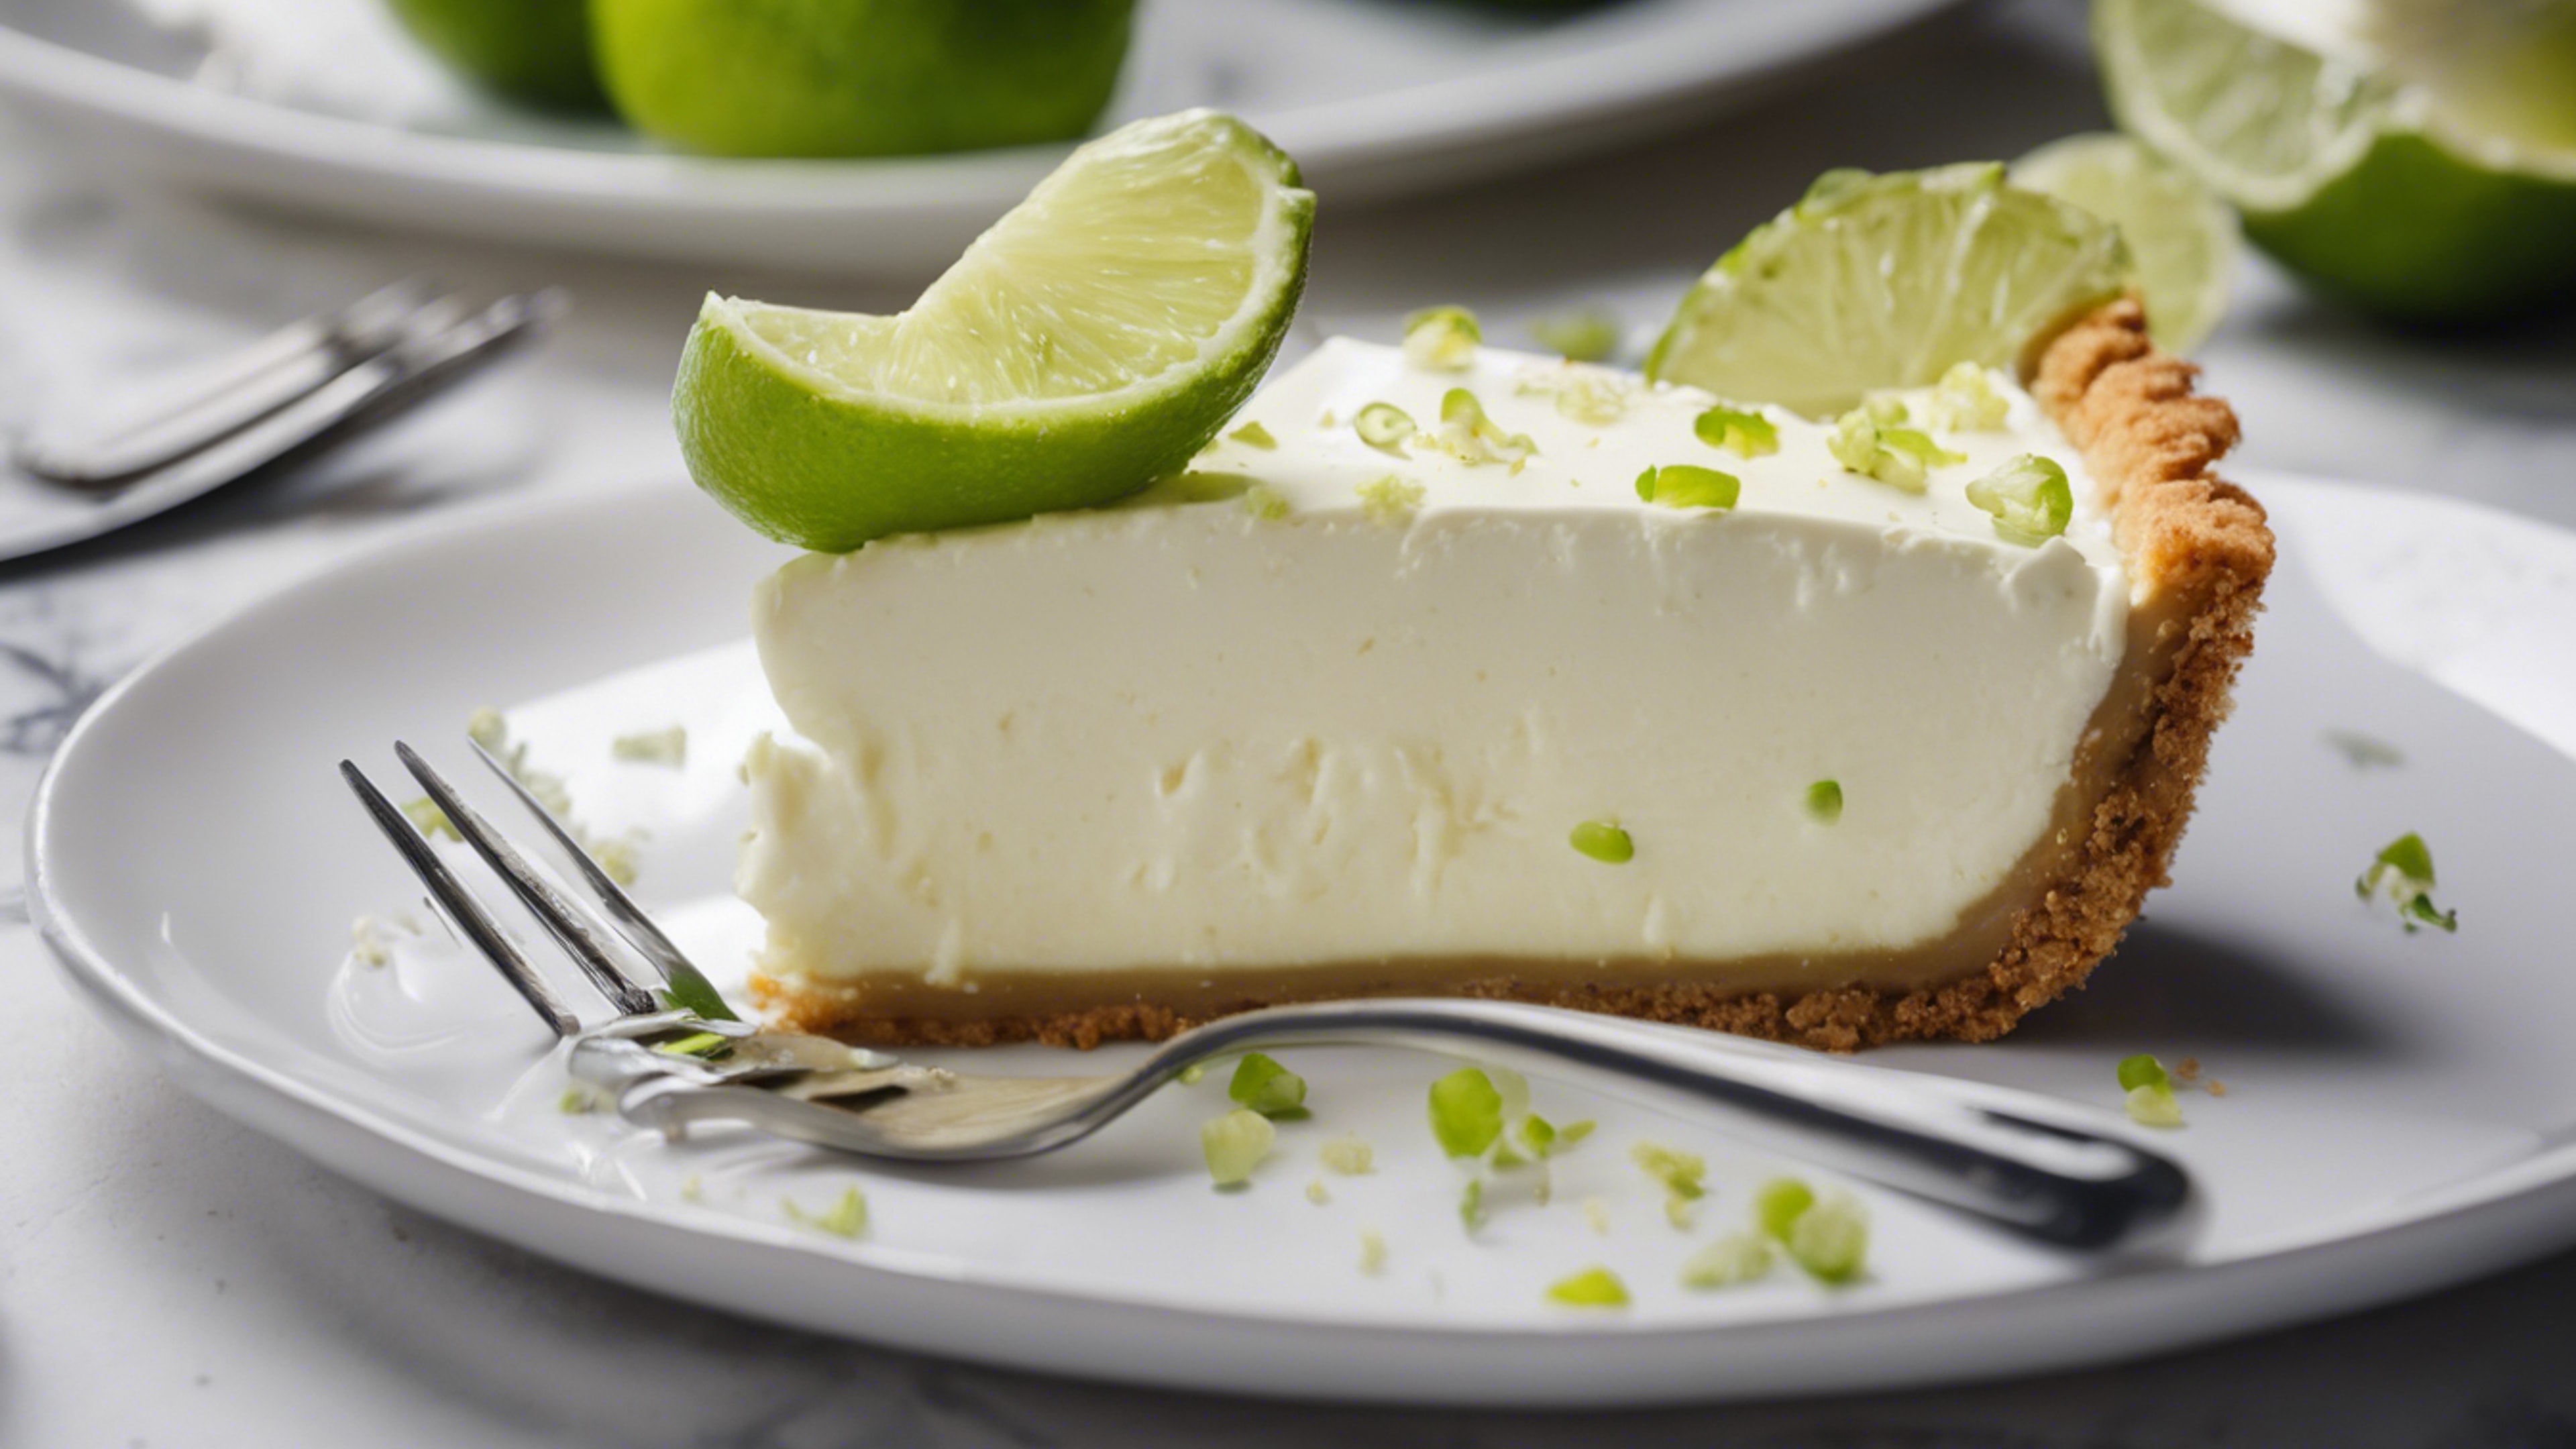 Delicious key lime pie served on a white ceramic plate with a silver fork. 牆紙[dc9d1e1923f243919b66]